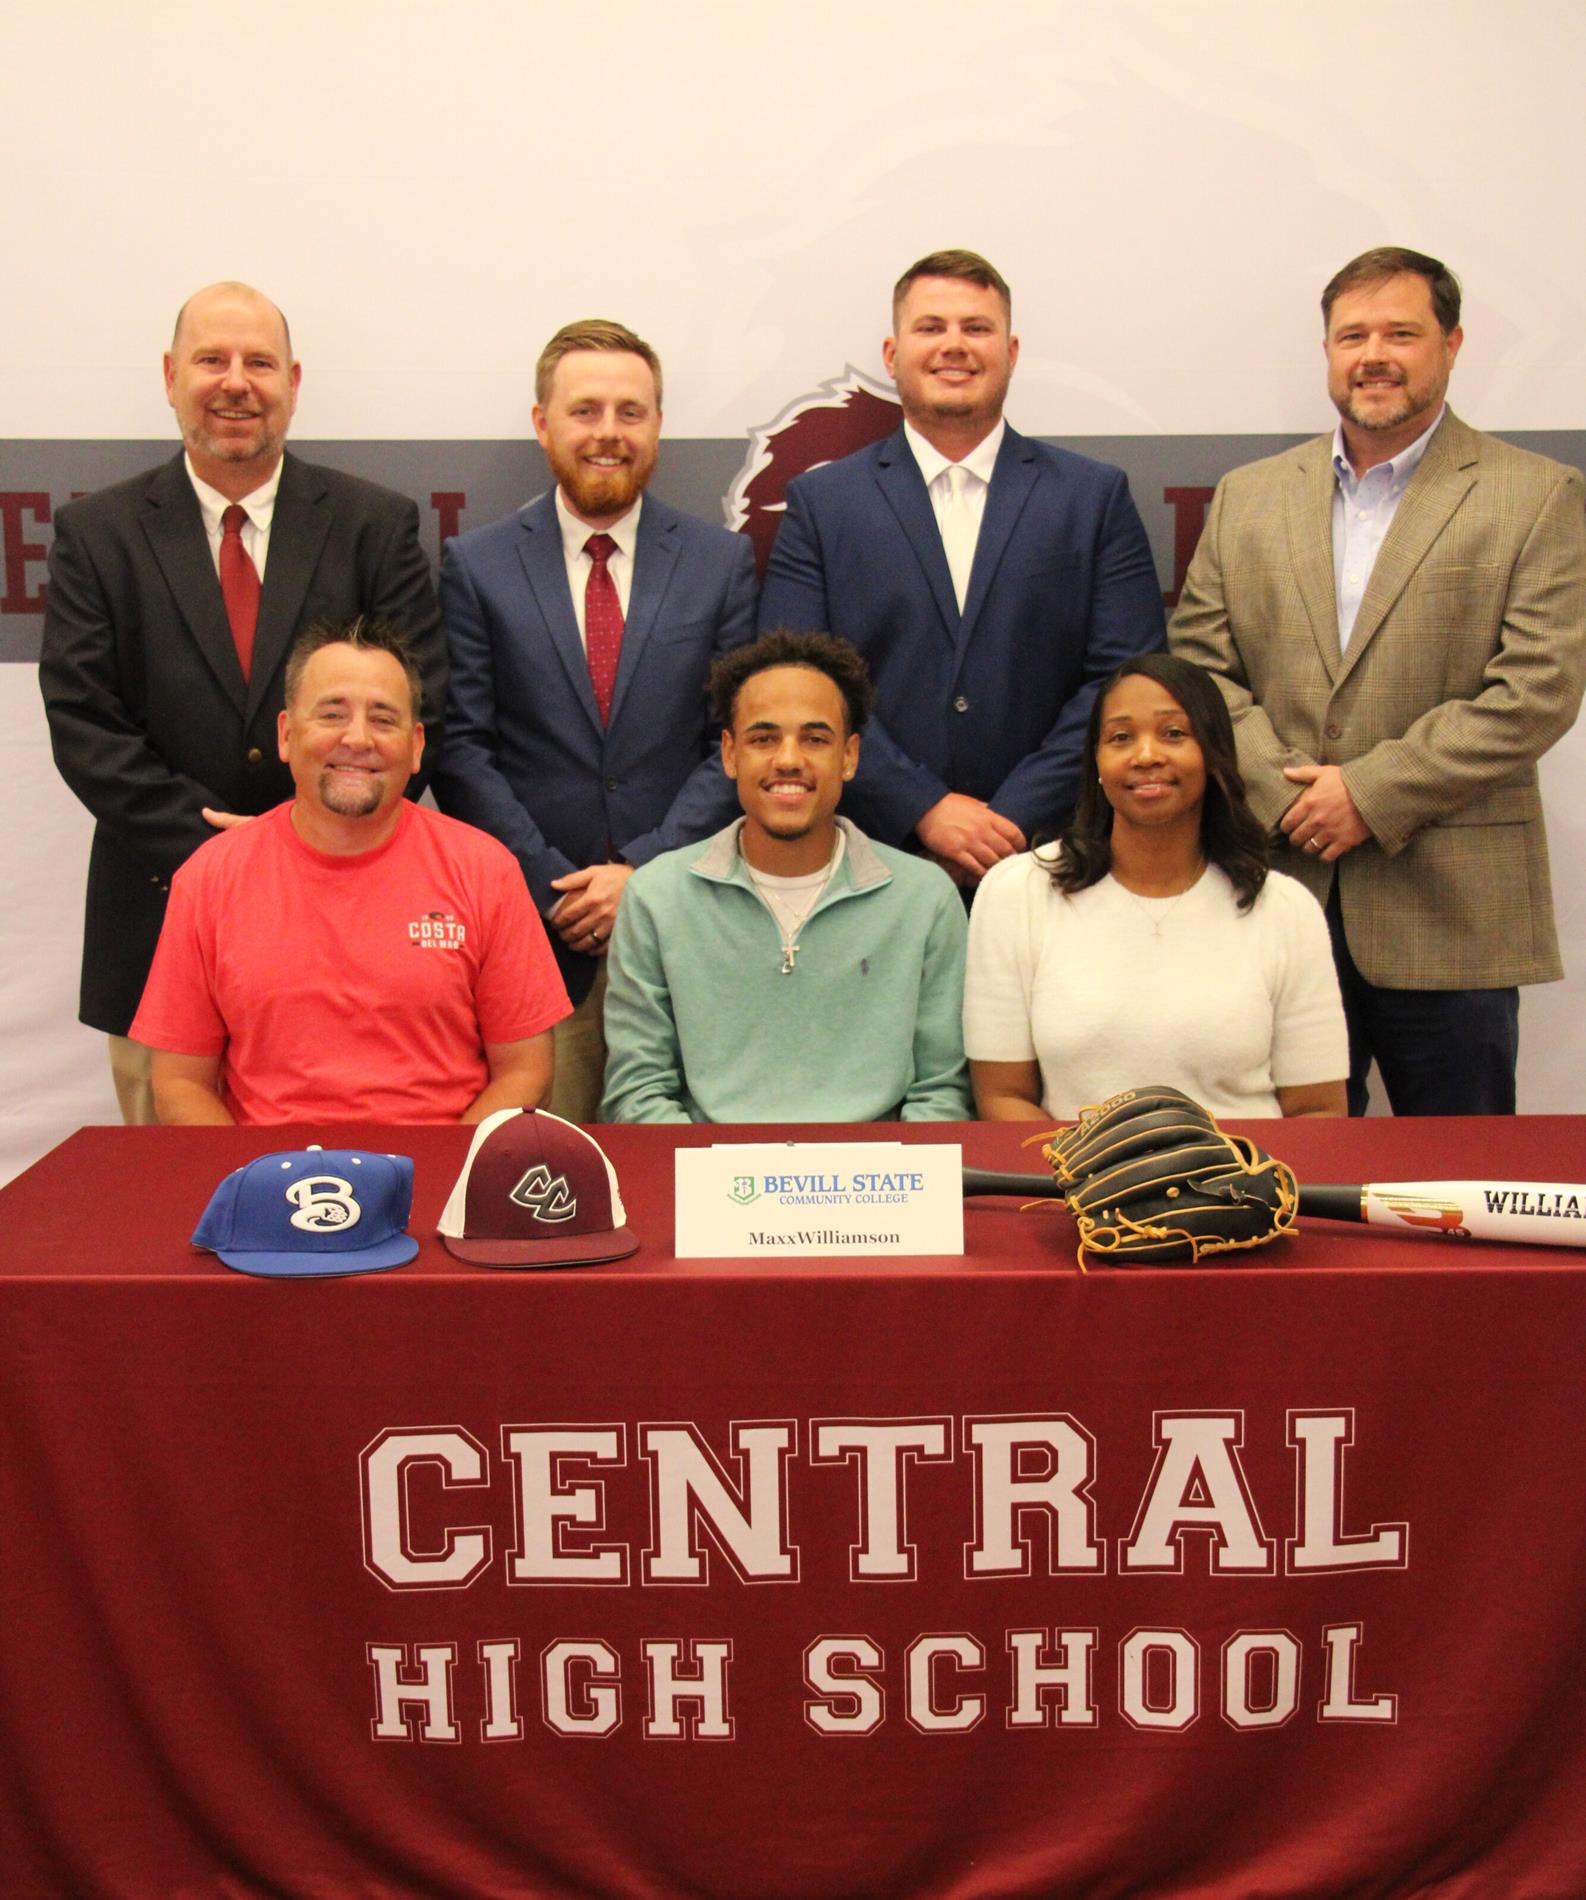 Maxx Williamson Signs with Bevill State Community College